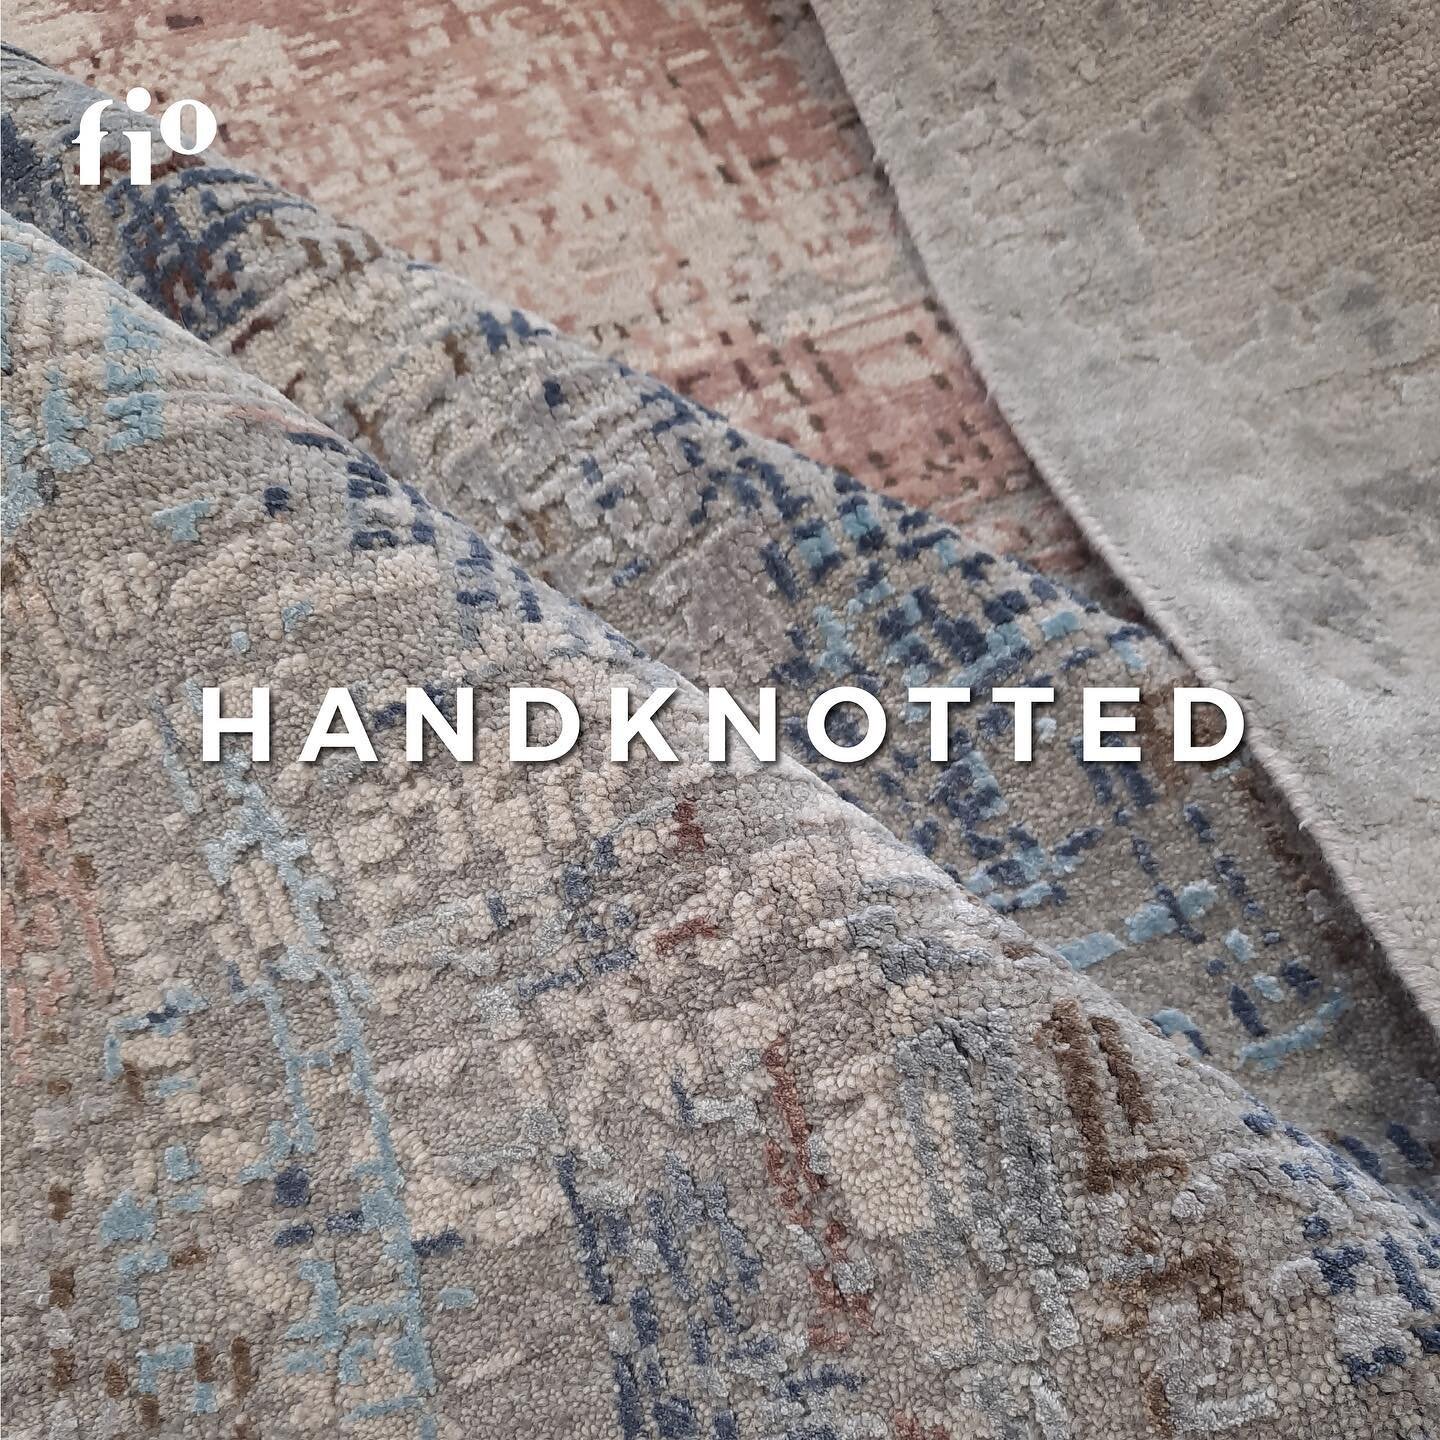 Our Hand knotted collection is handmade, yarn by yarn with remarkable precision, patience and craftsmanship.

To find the best rug for your space, contact our sales consultant at: 
WA: ‭0811 8252 900‬
www.fio.co.id
Tokopedia, Shope